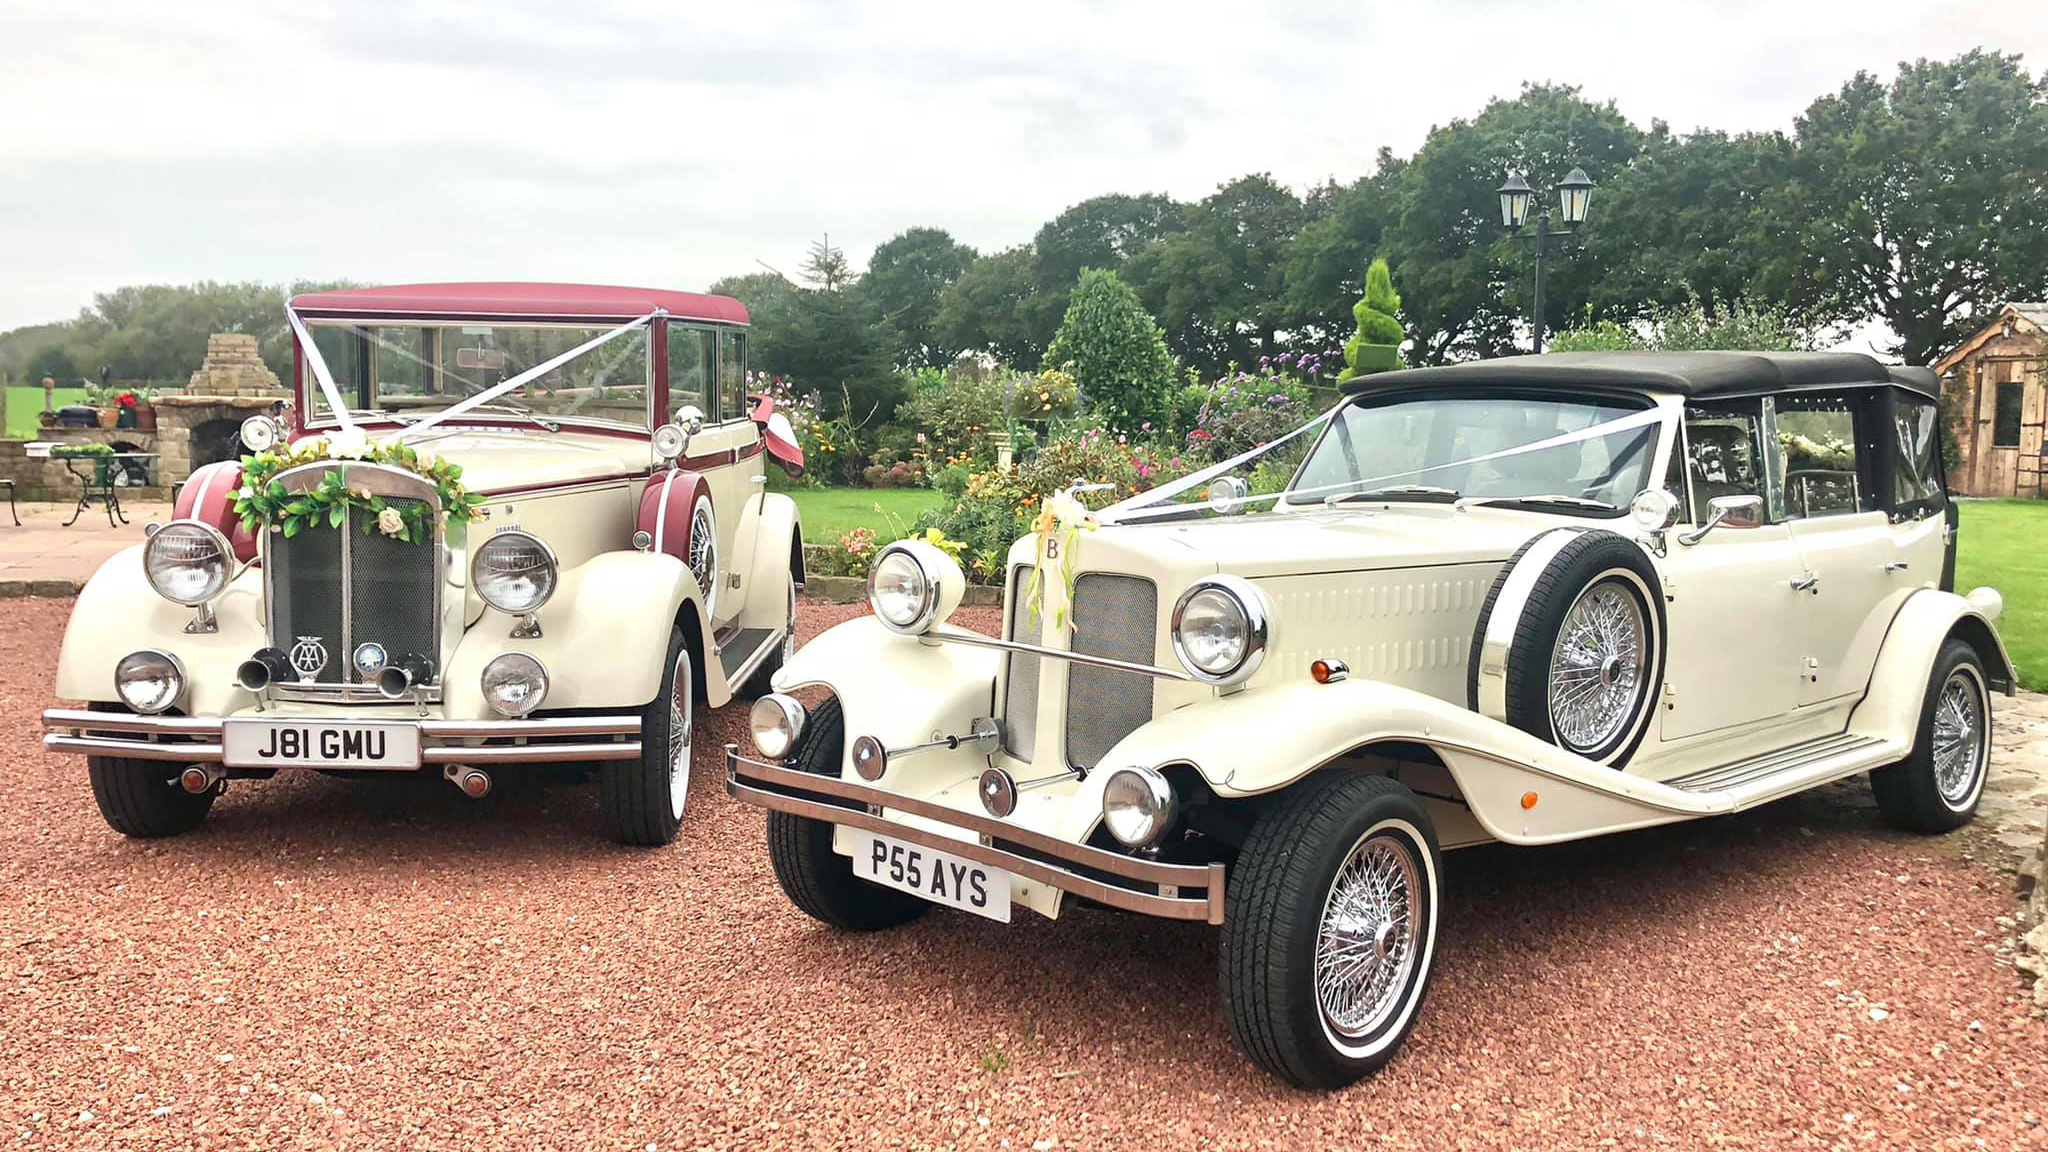 Two vintage wedding cars decorated with white ribbons and bows at a local Burnley wedding. Both vehicles are parked side-by-side